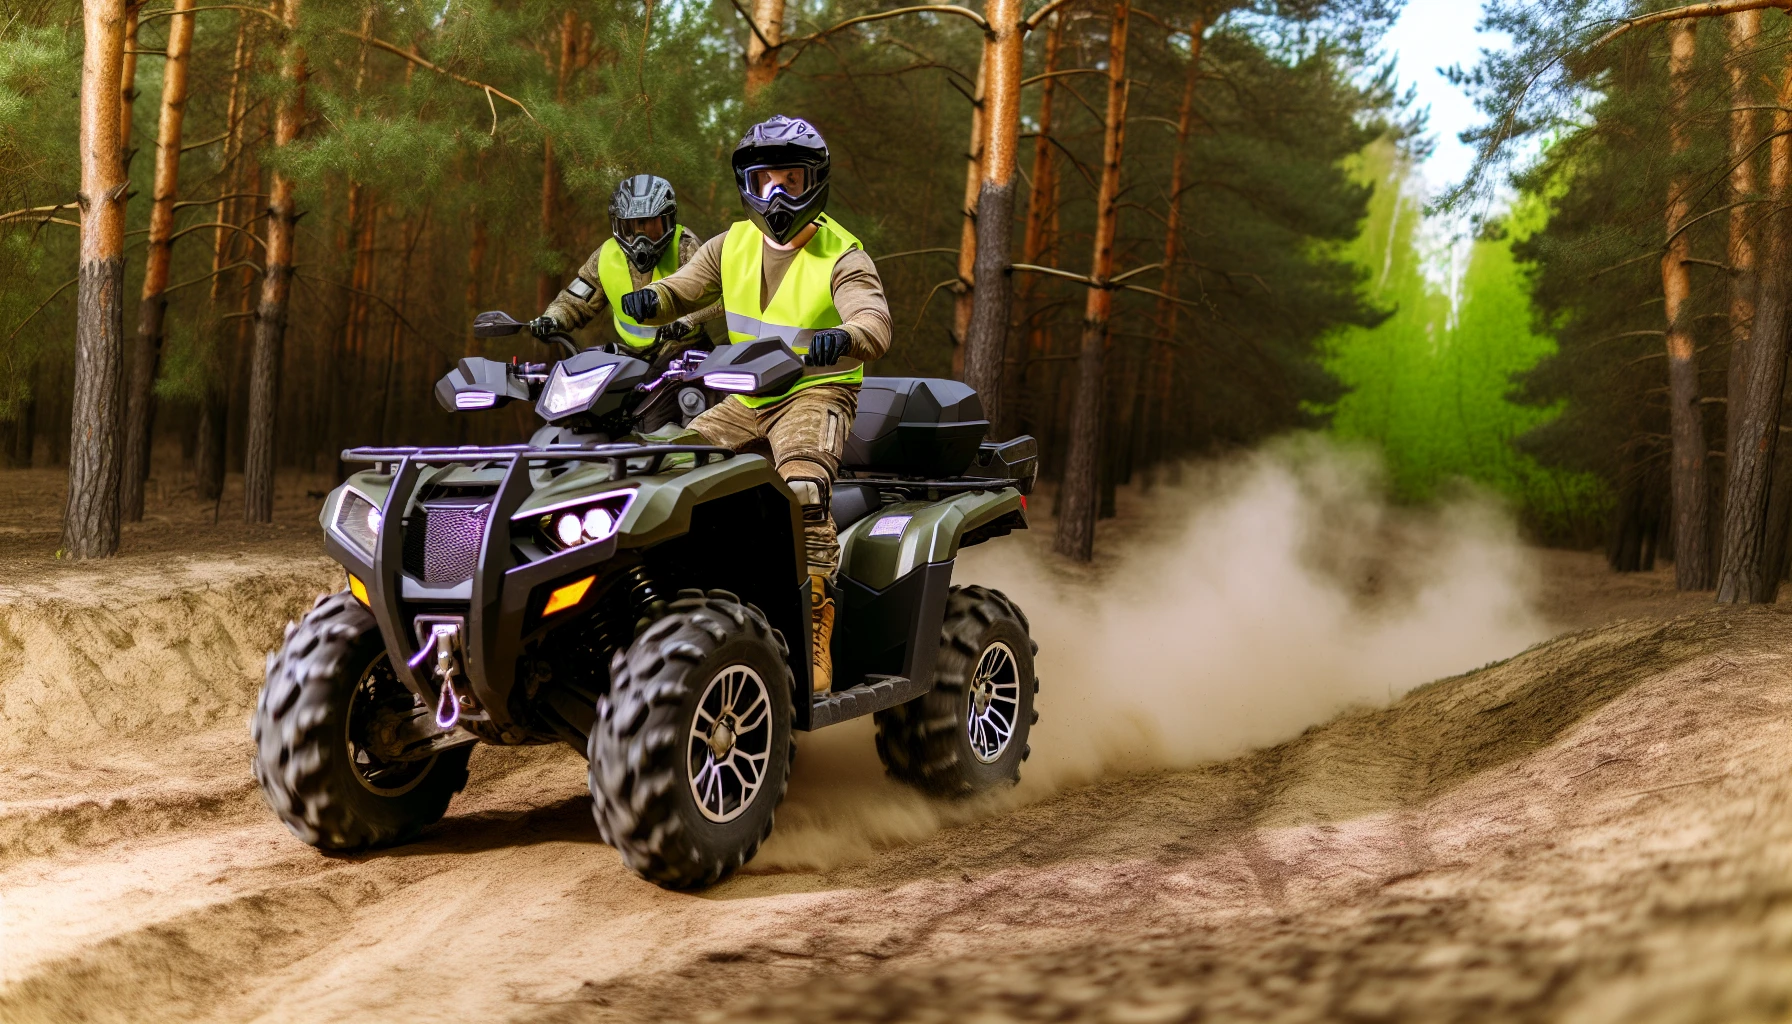 Rider wearing protective gear on an ATV